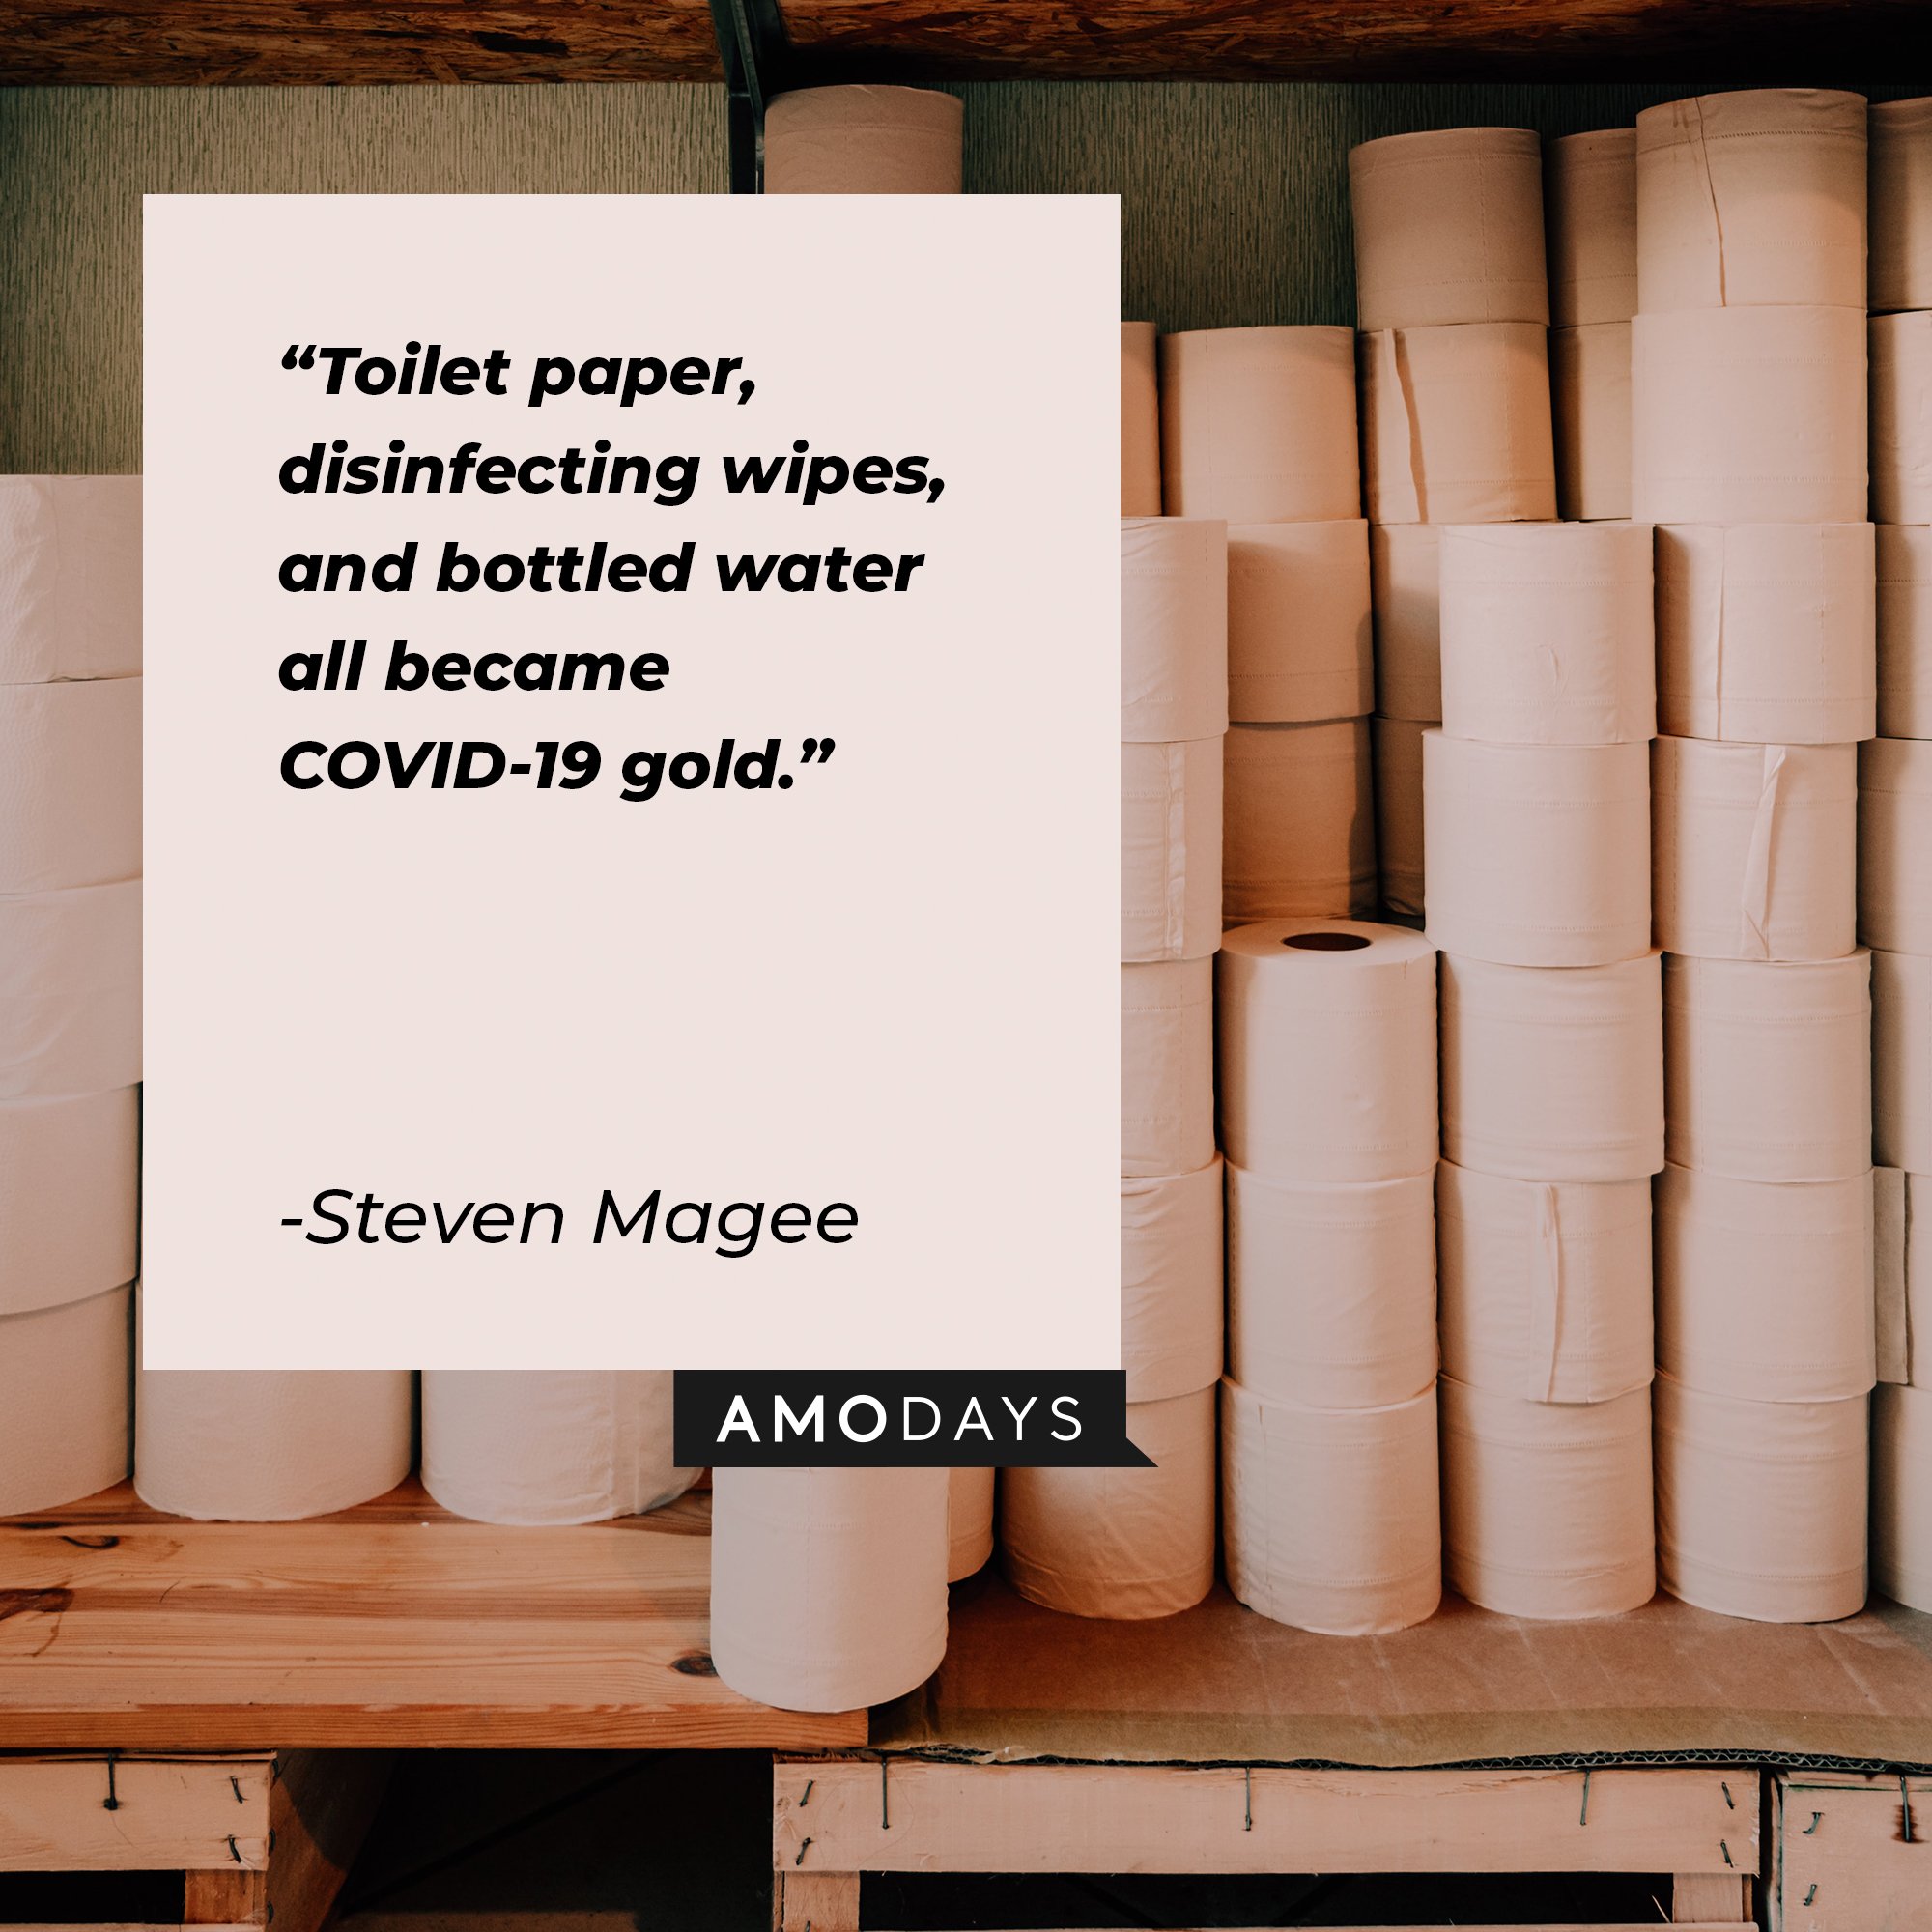  Steven Magee’s quote: "Toilet paper, disinfecting wipes, and bottled water all became COVID-19 gold." | Image: AmoDays